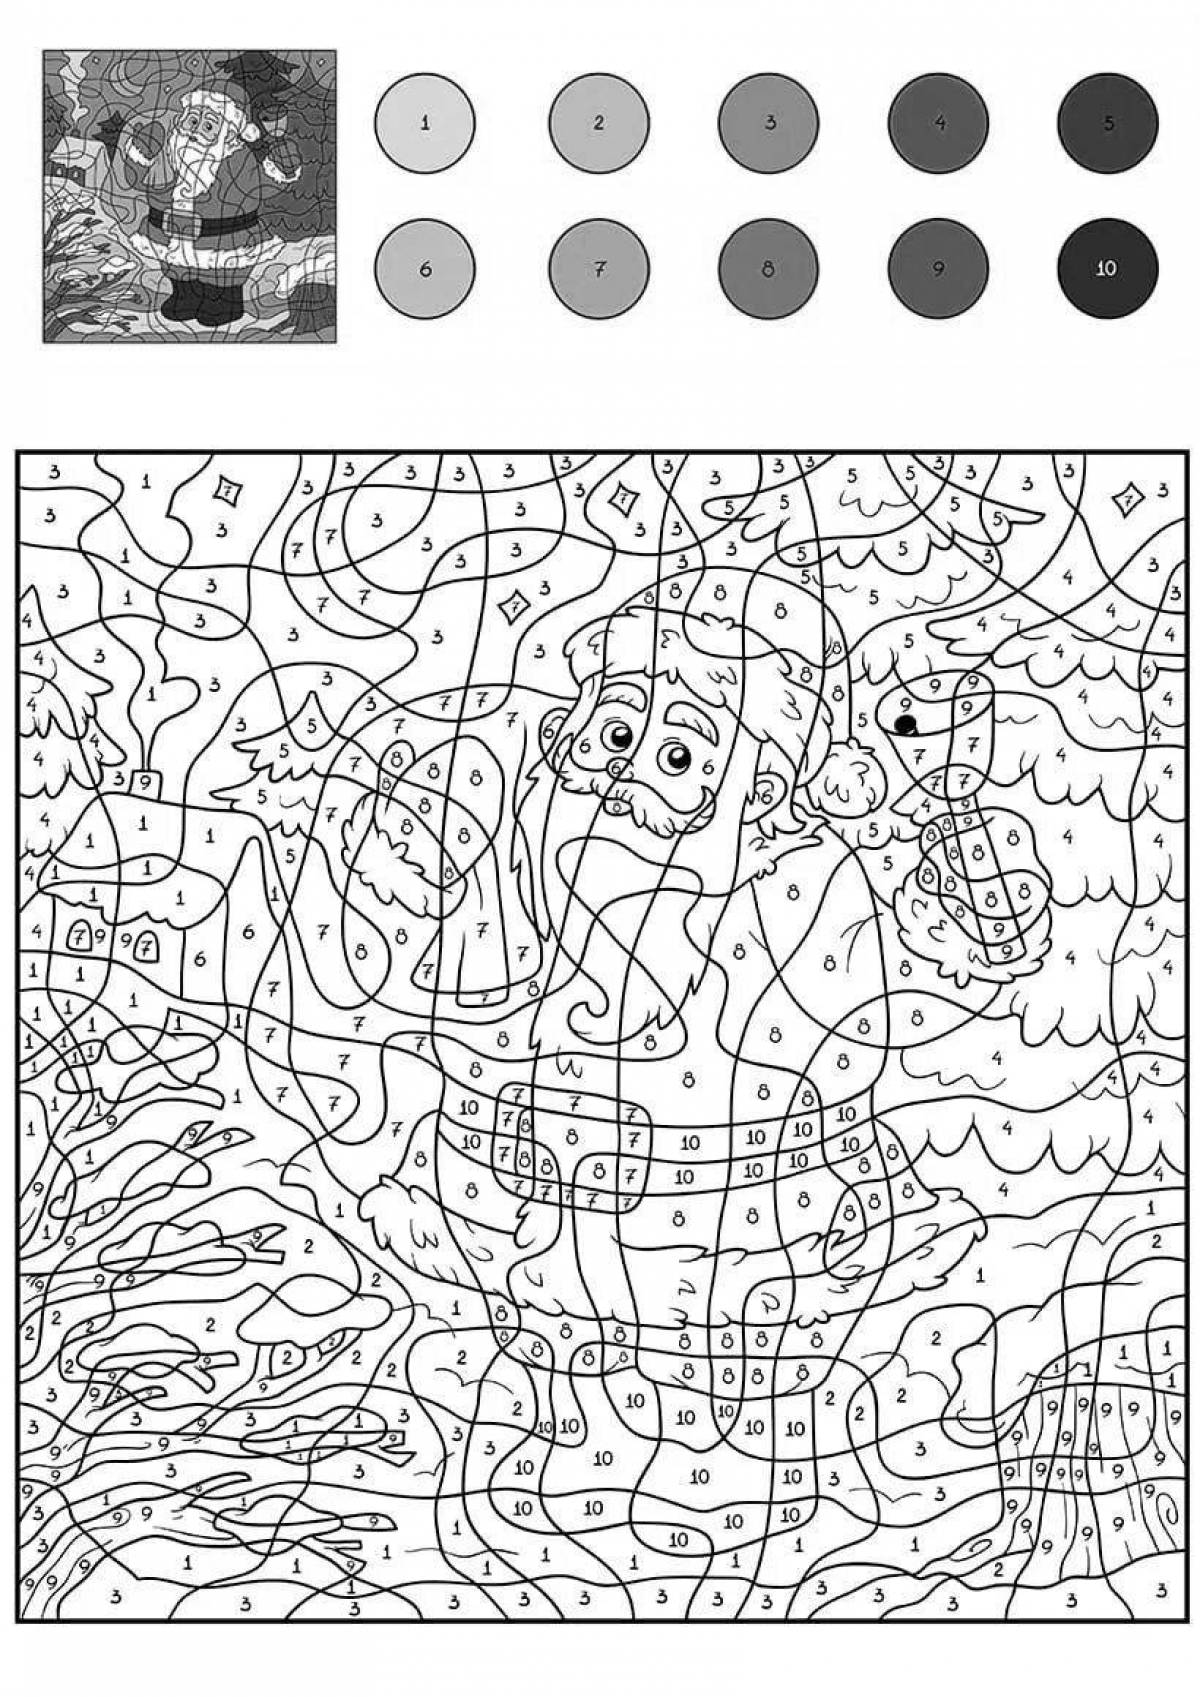 Stimulating coloring games no download by numbers